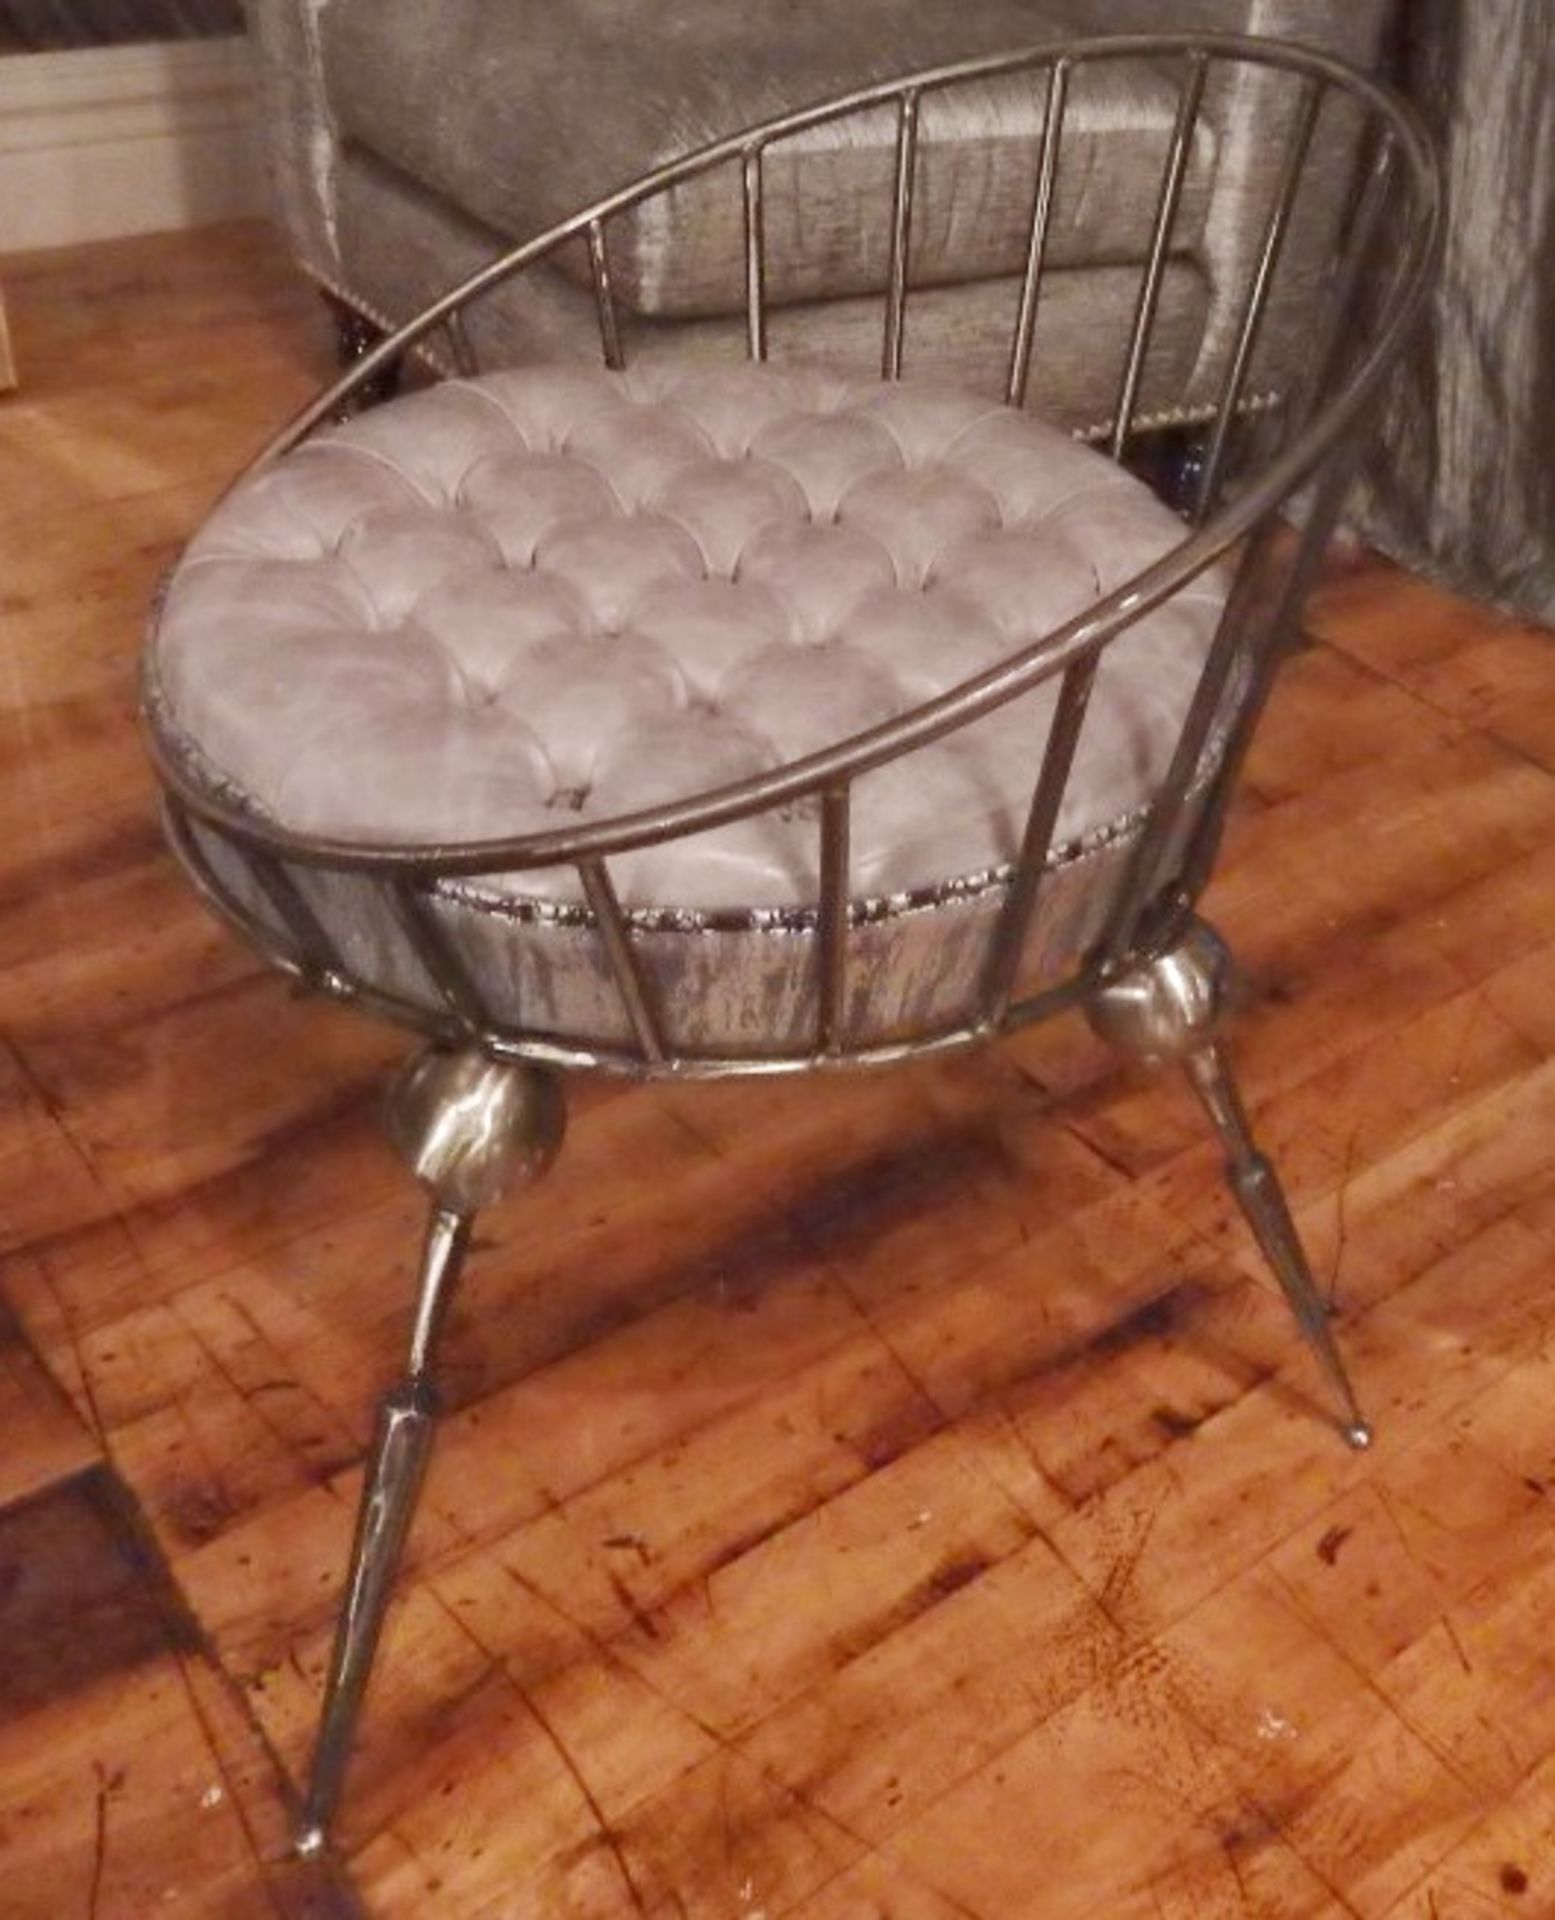 1 x Bespoke Handcrafted Chair - Unique Metal Framework With Leather Upholstered Cushion  - Colour: - Image 3 of 6